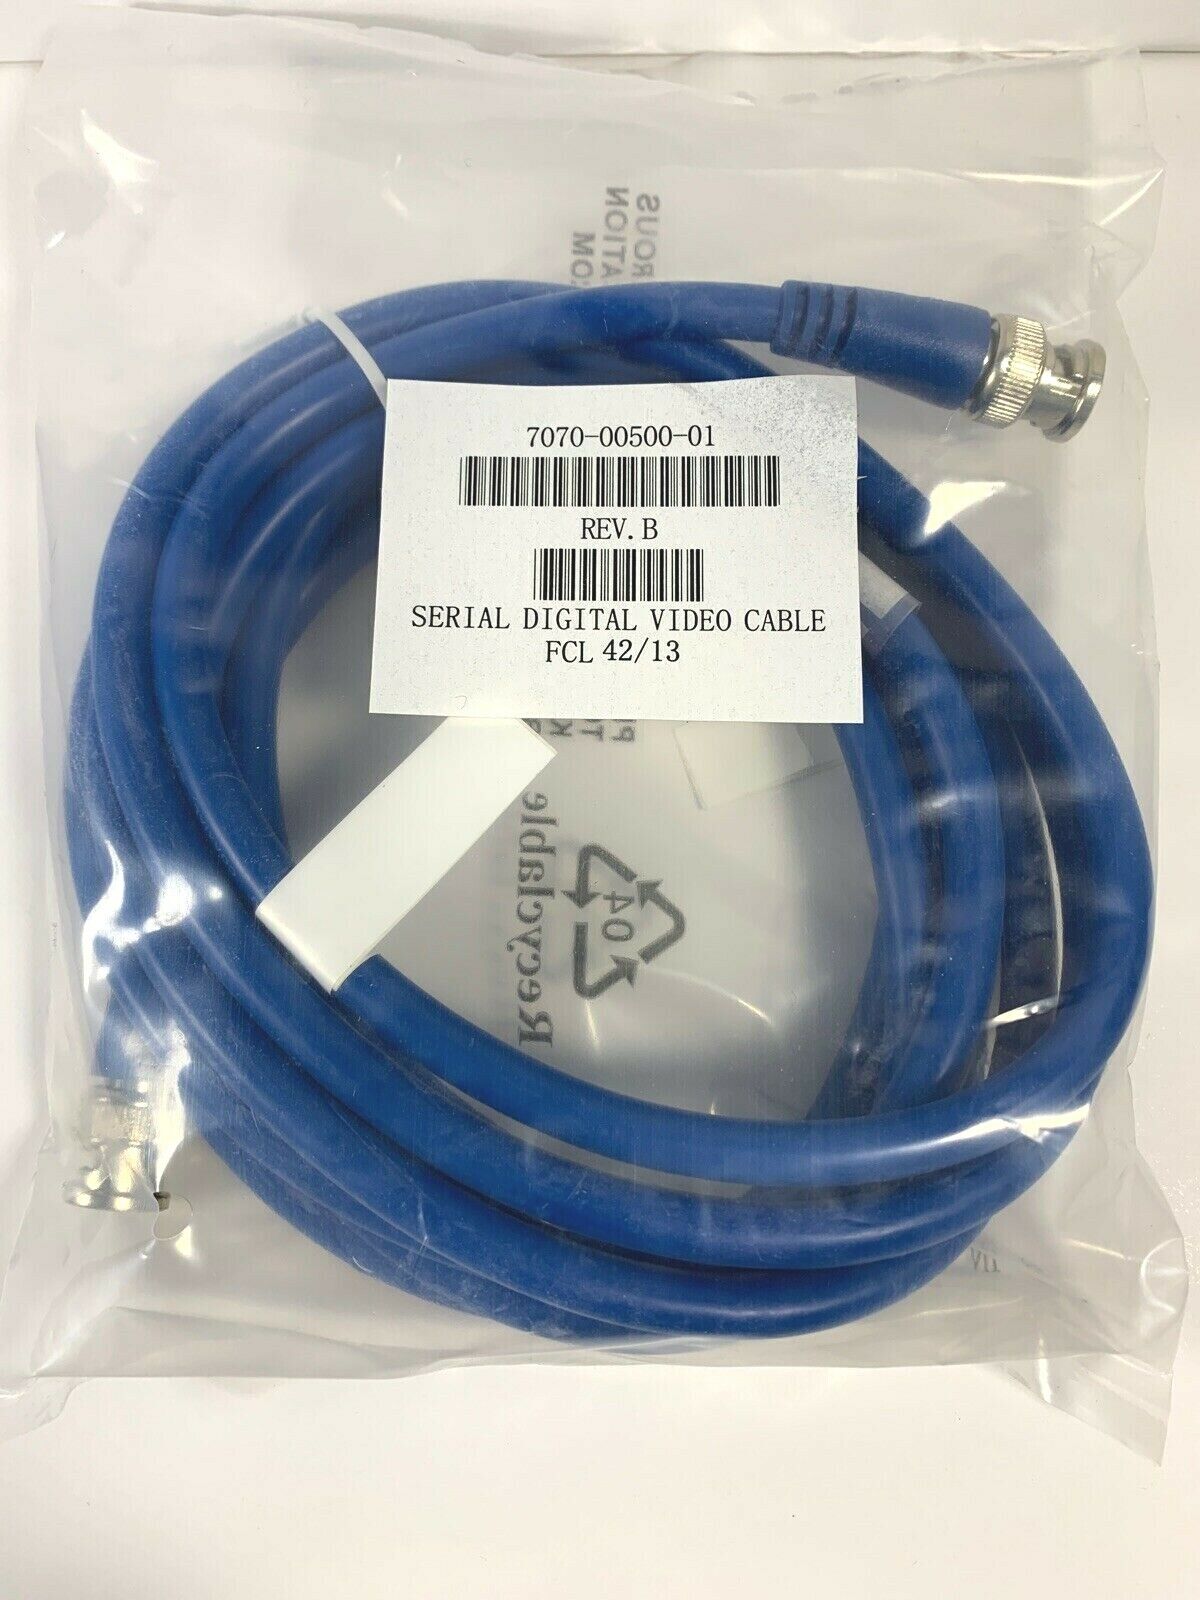 NEW Avid 0070-00500-01 Serial Digital Video Cable Blue 6' FCL 42/13